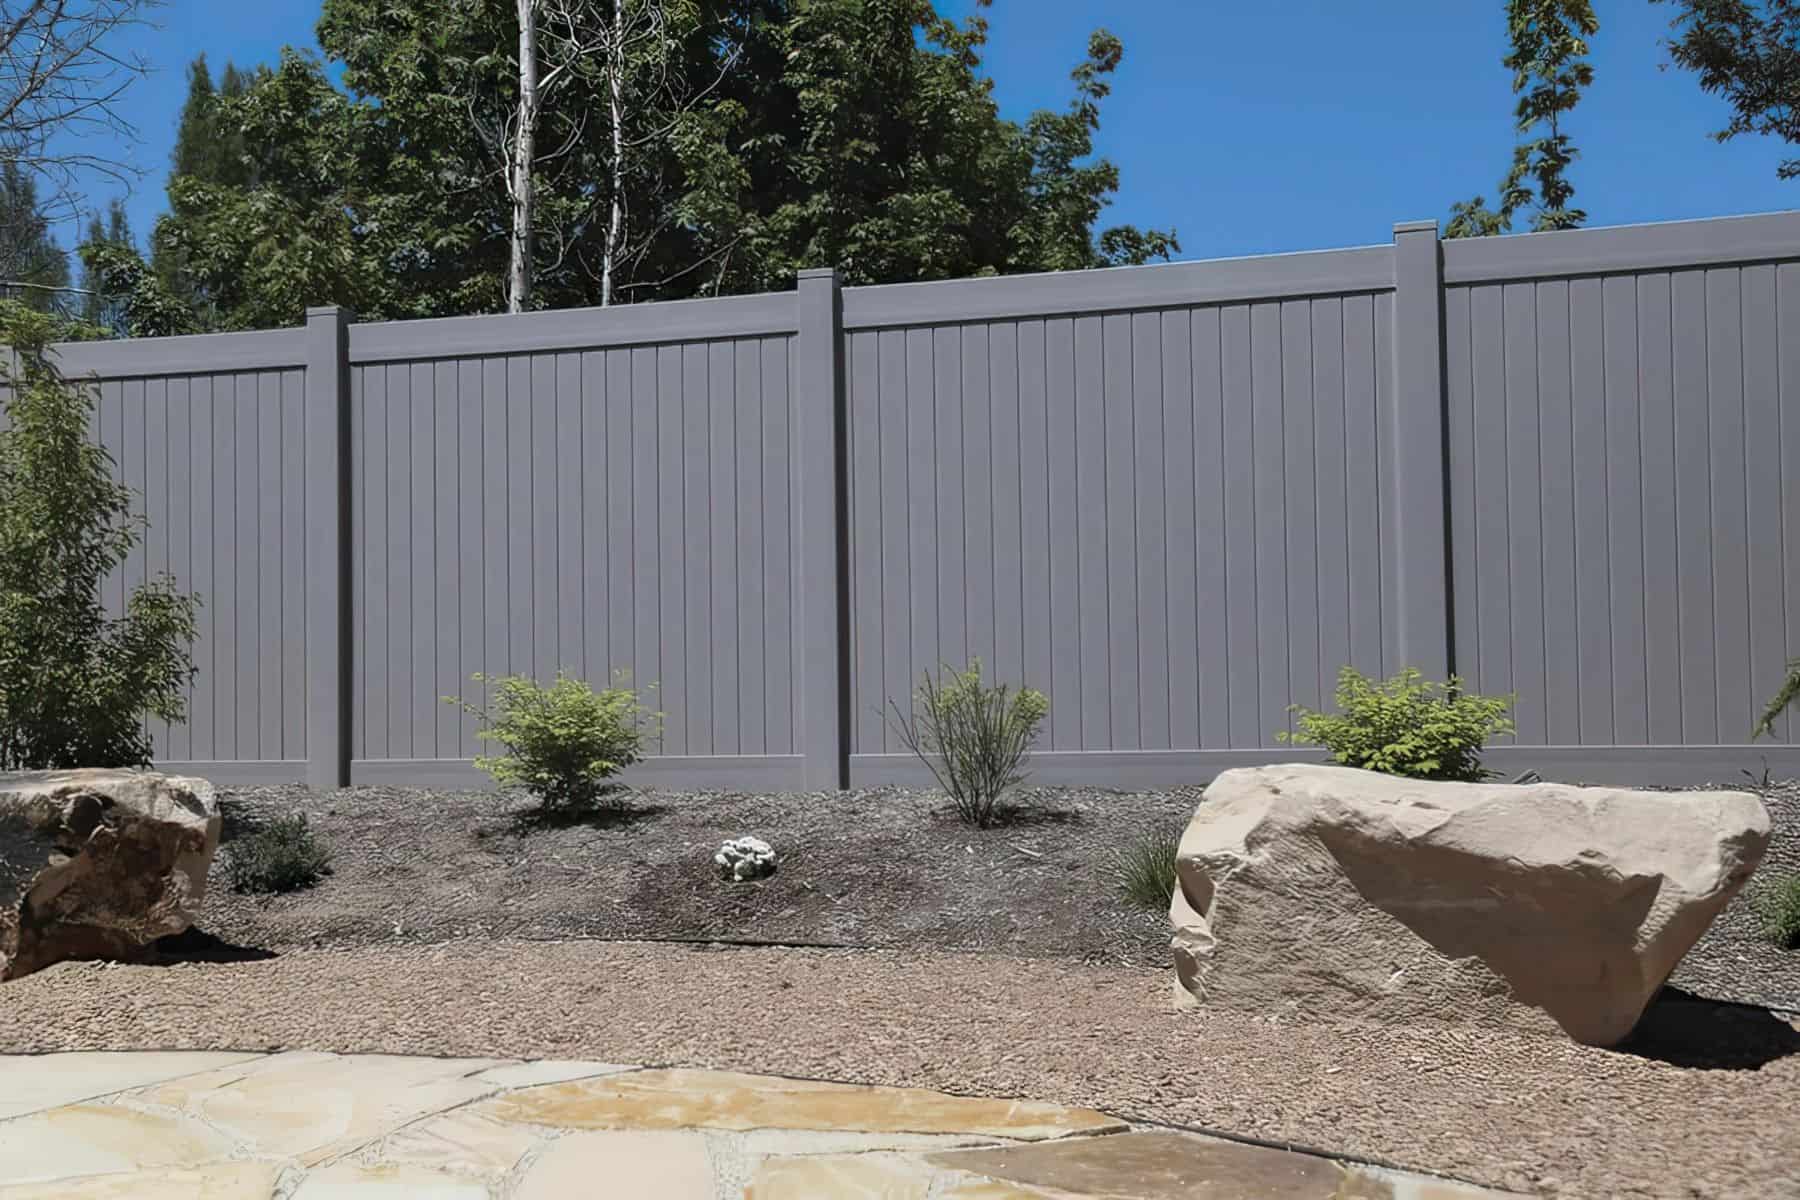 Vinyl gray colored fence, small trees & granite walkway with background trees.